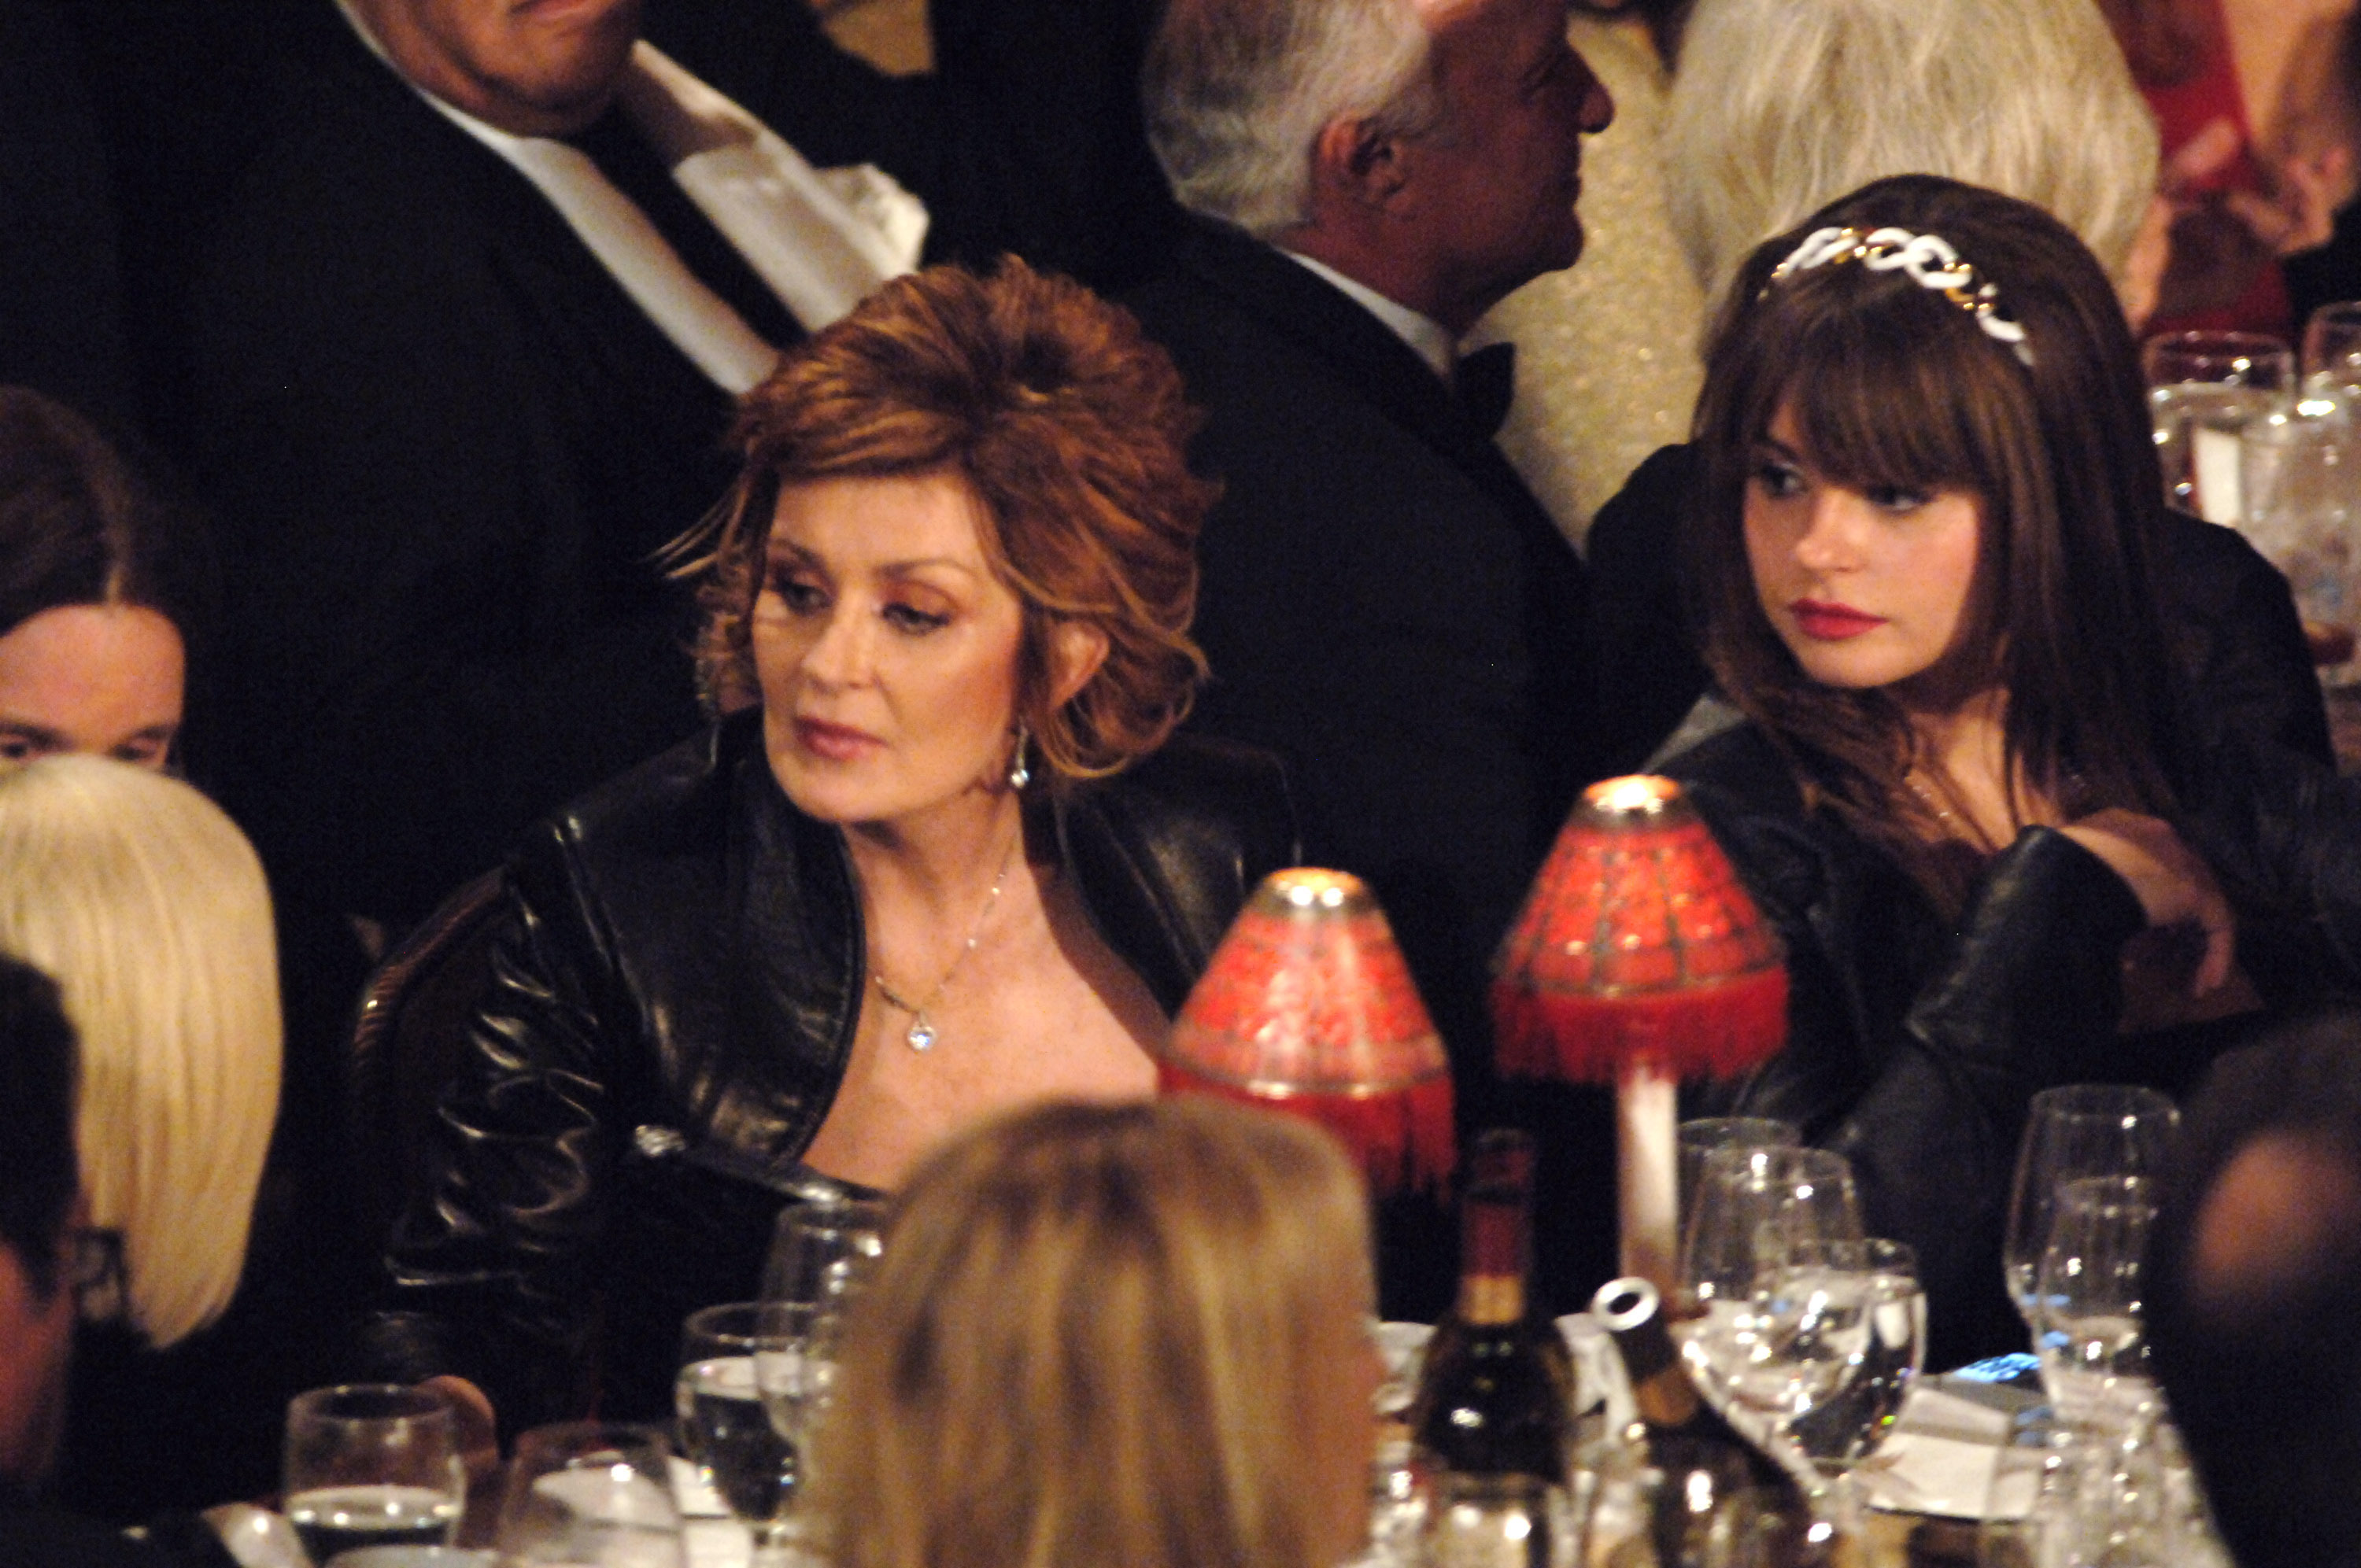 Sharon and Aimee Osbourne at the 21st Annual Rock and Roll Hall of Fame Induction Ceremony on March 13, 2006 in New York City | Source: Getty Images